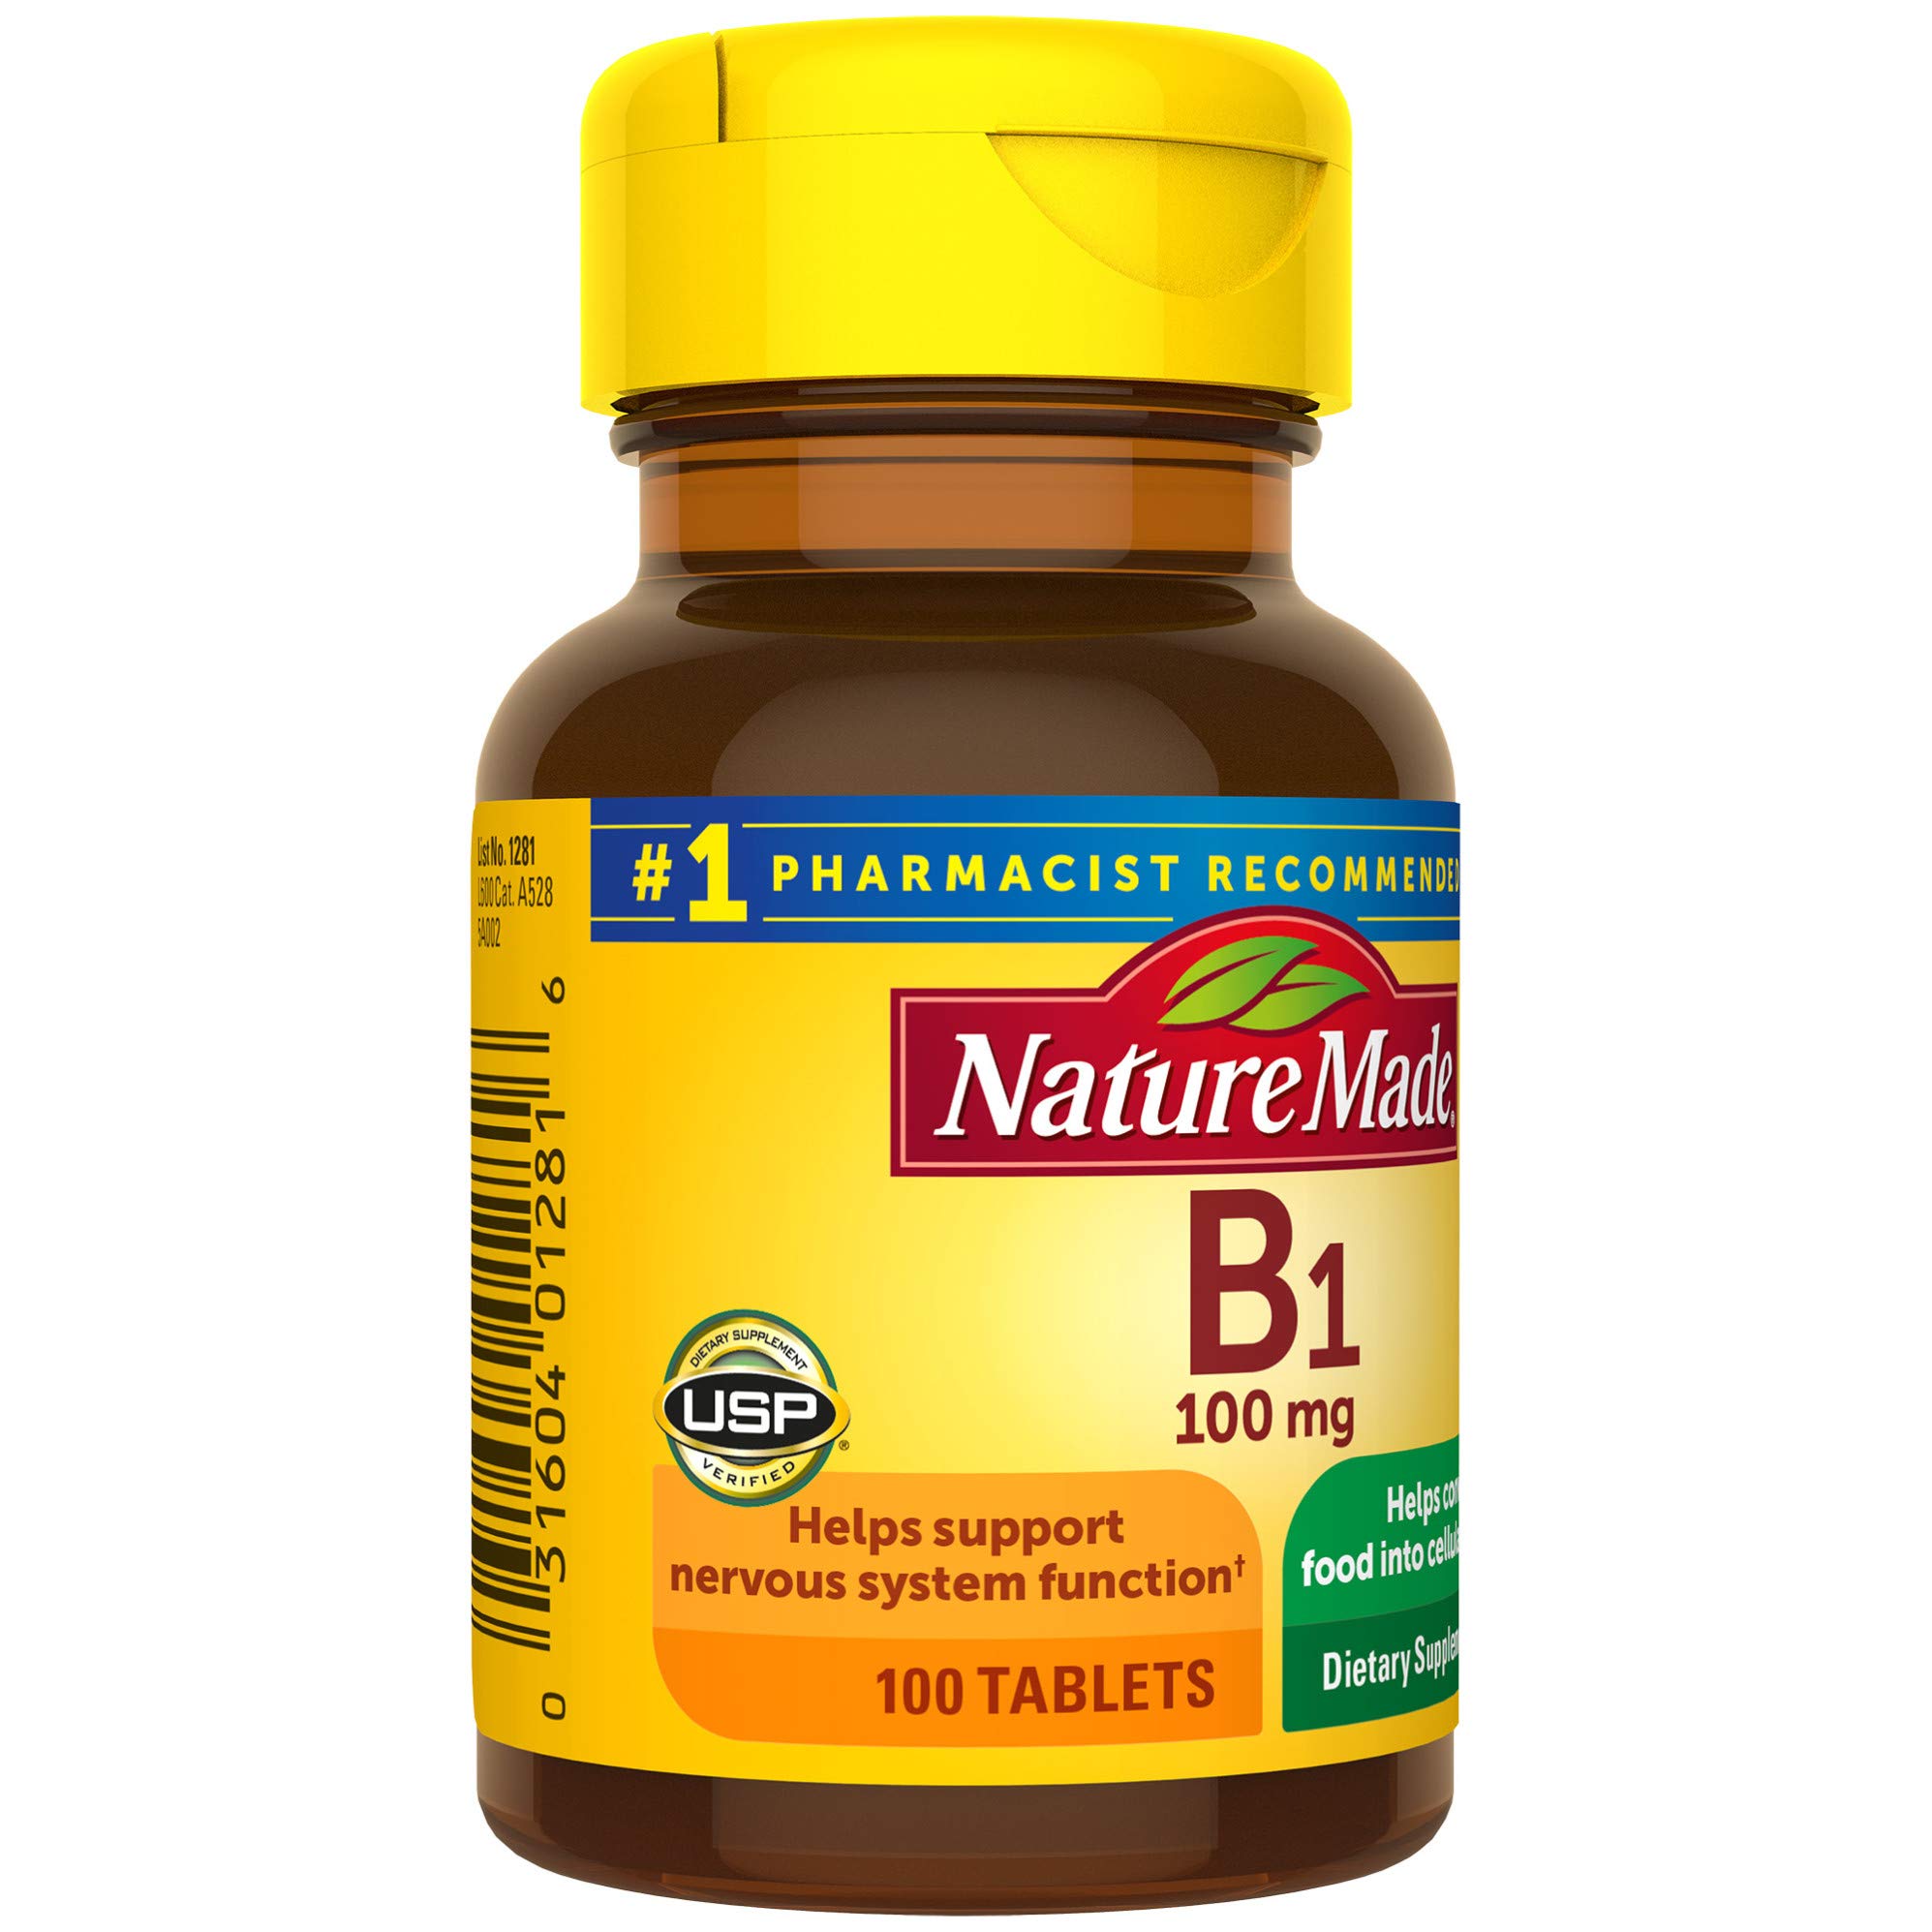 Nature Made Vitamin B1 100 mg, Dietary Supplement for Energy Metabolism Support, 100 Tablets, 100 Day Supply